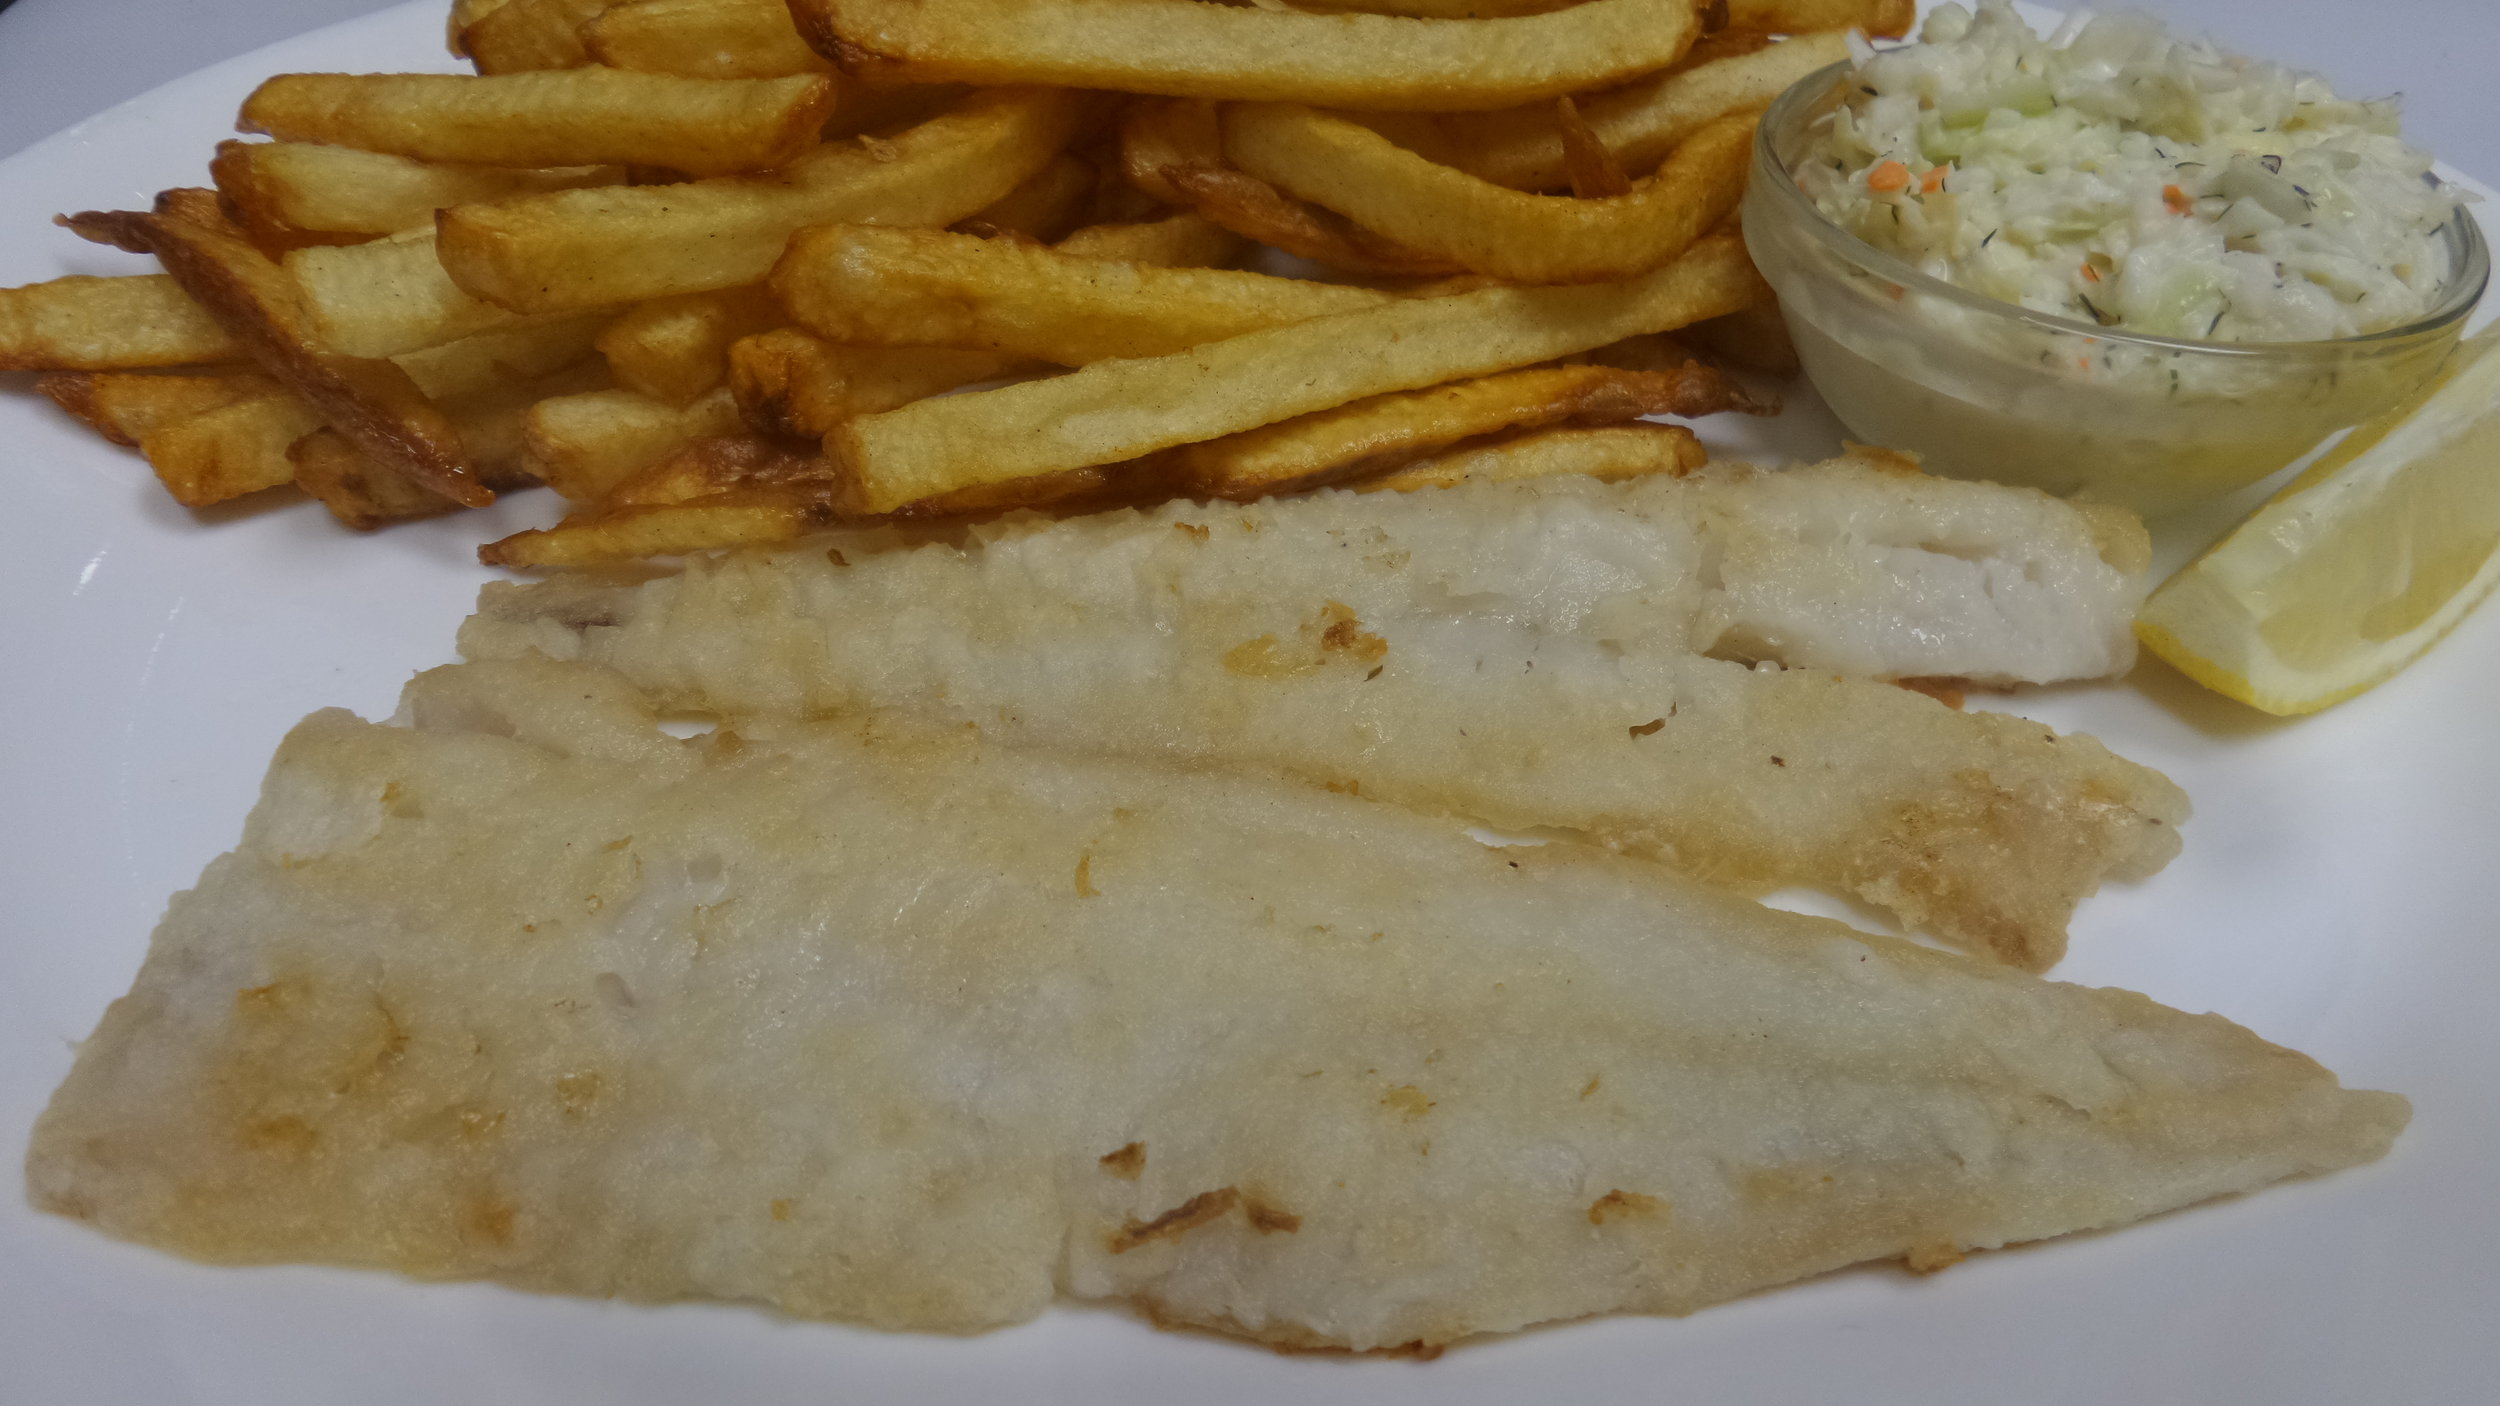 2 Pcs Sole and Chips (Pan Fried)